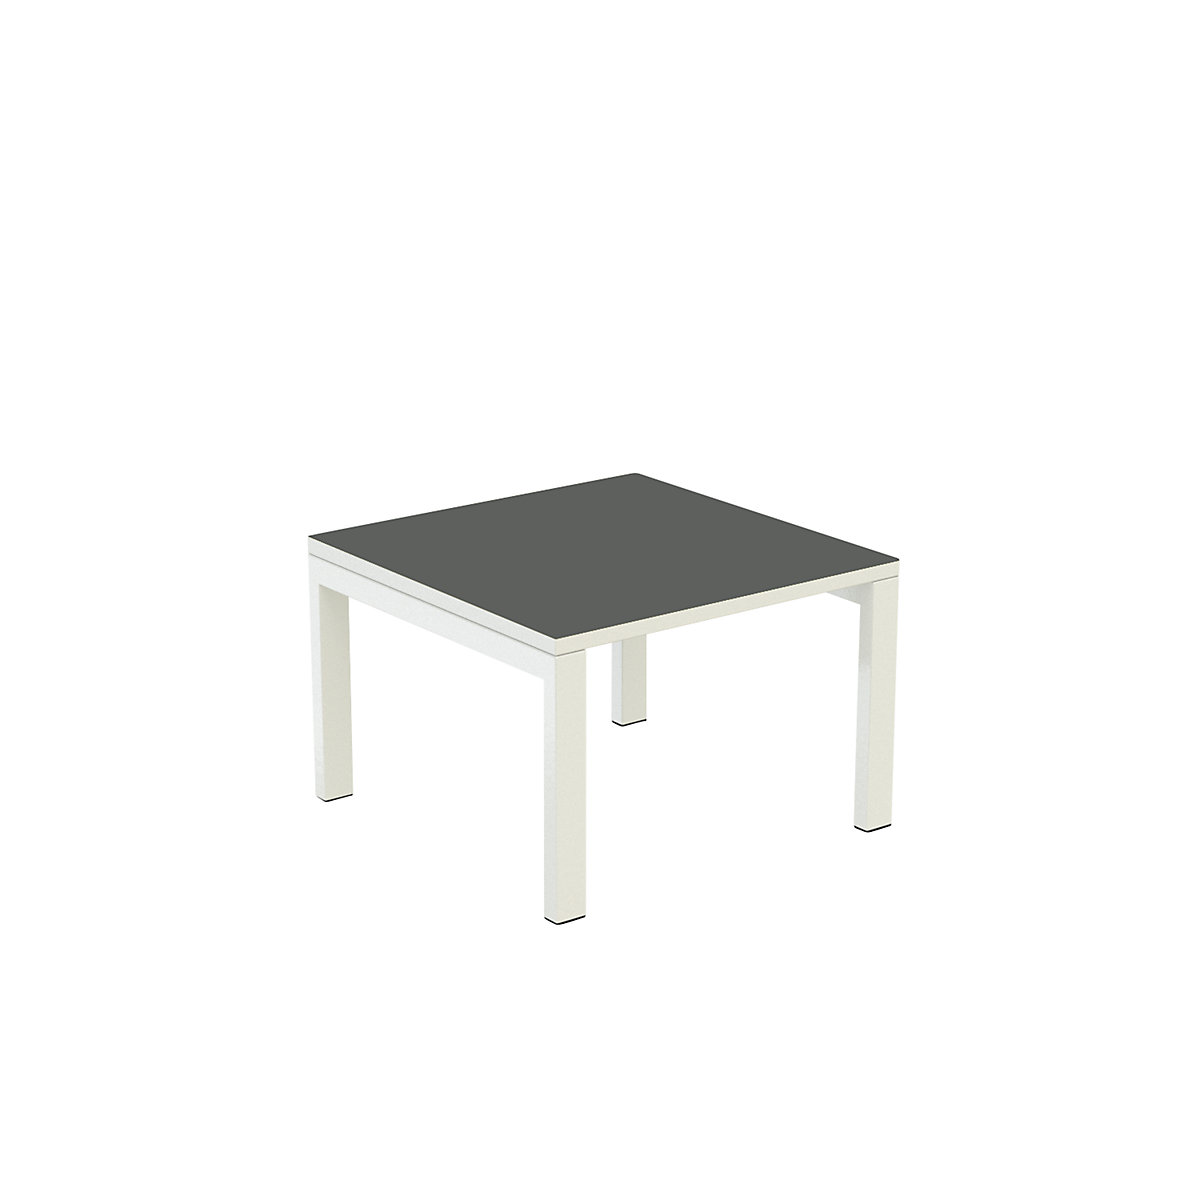 Table d'appoint easyDesk® – Paperflow, h x l x p 400 x 600 x 600 mm, anthracite-10